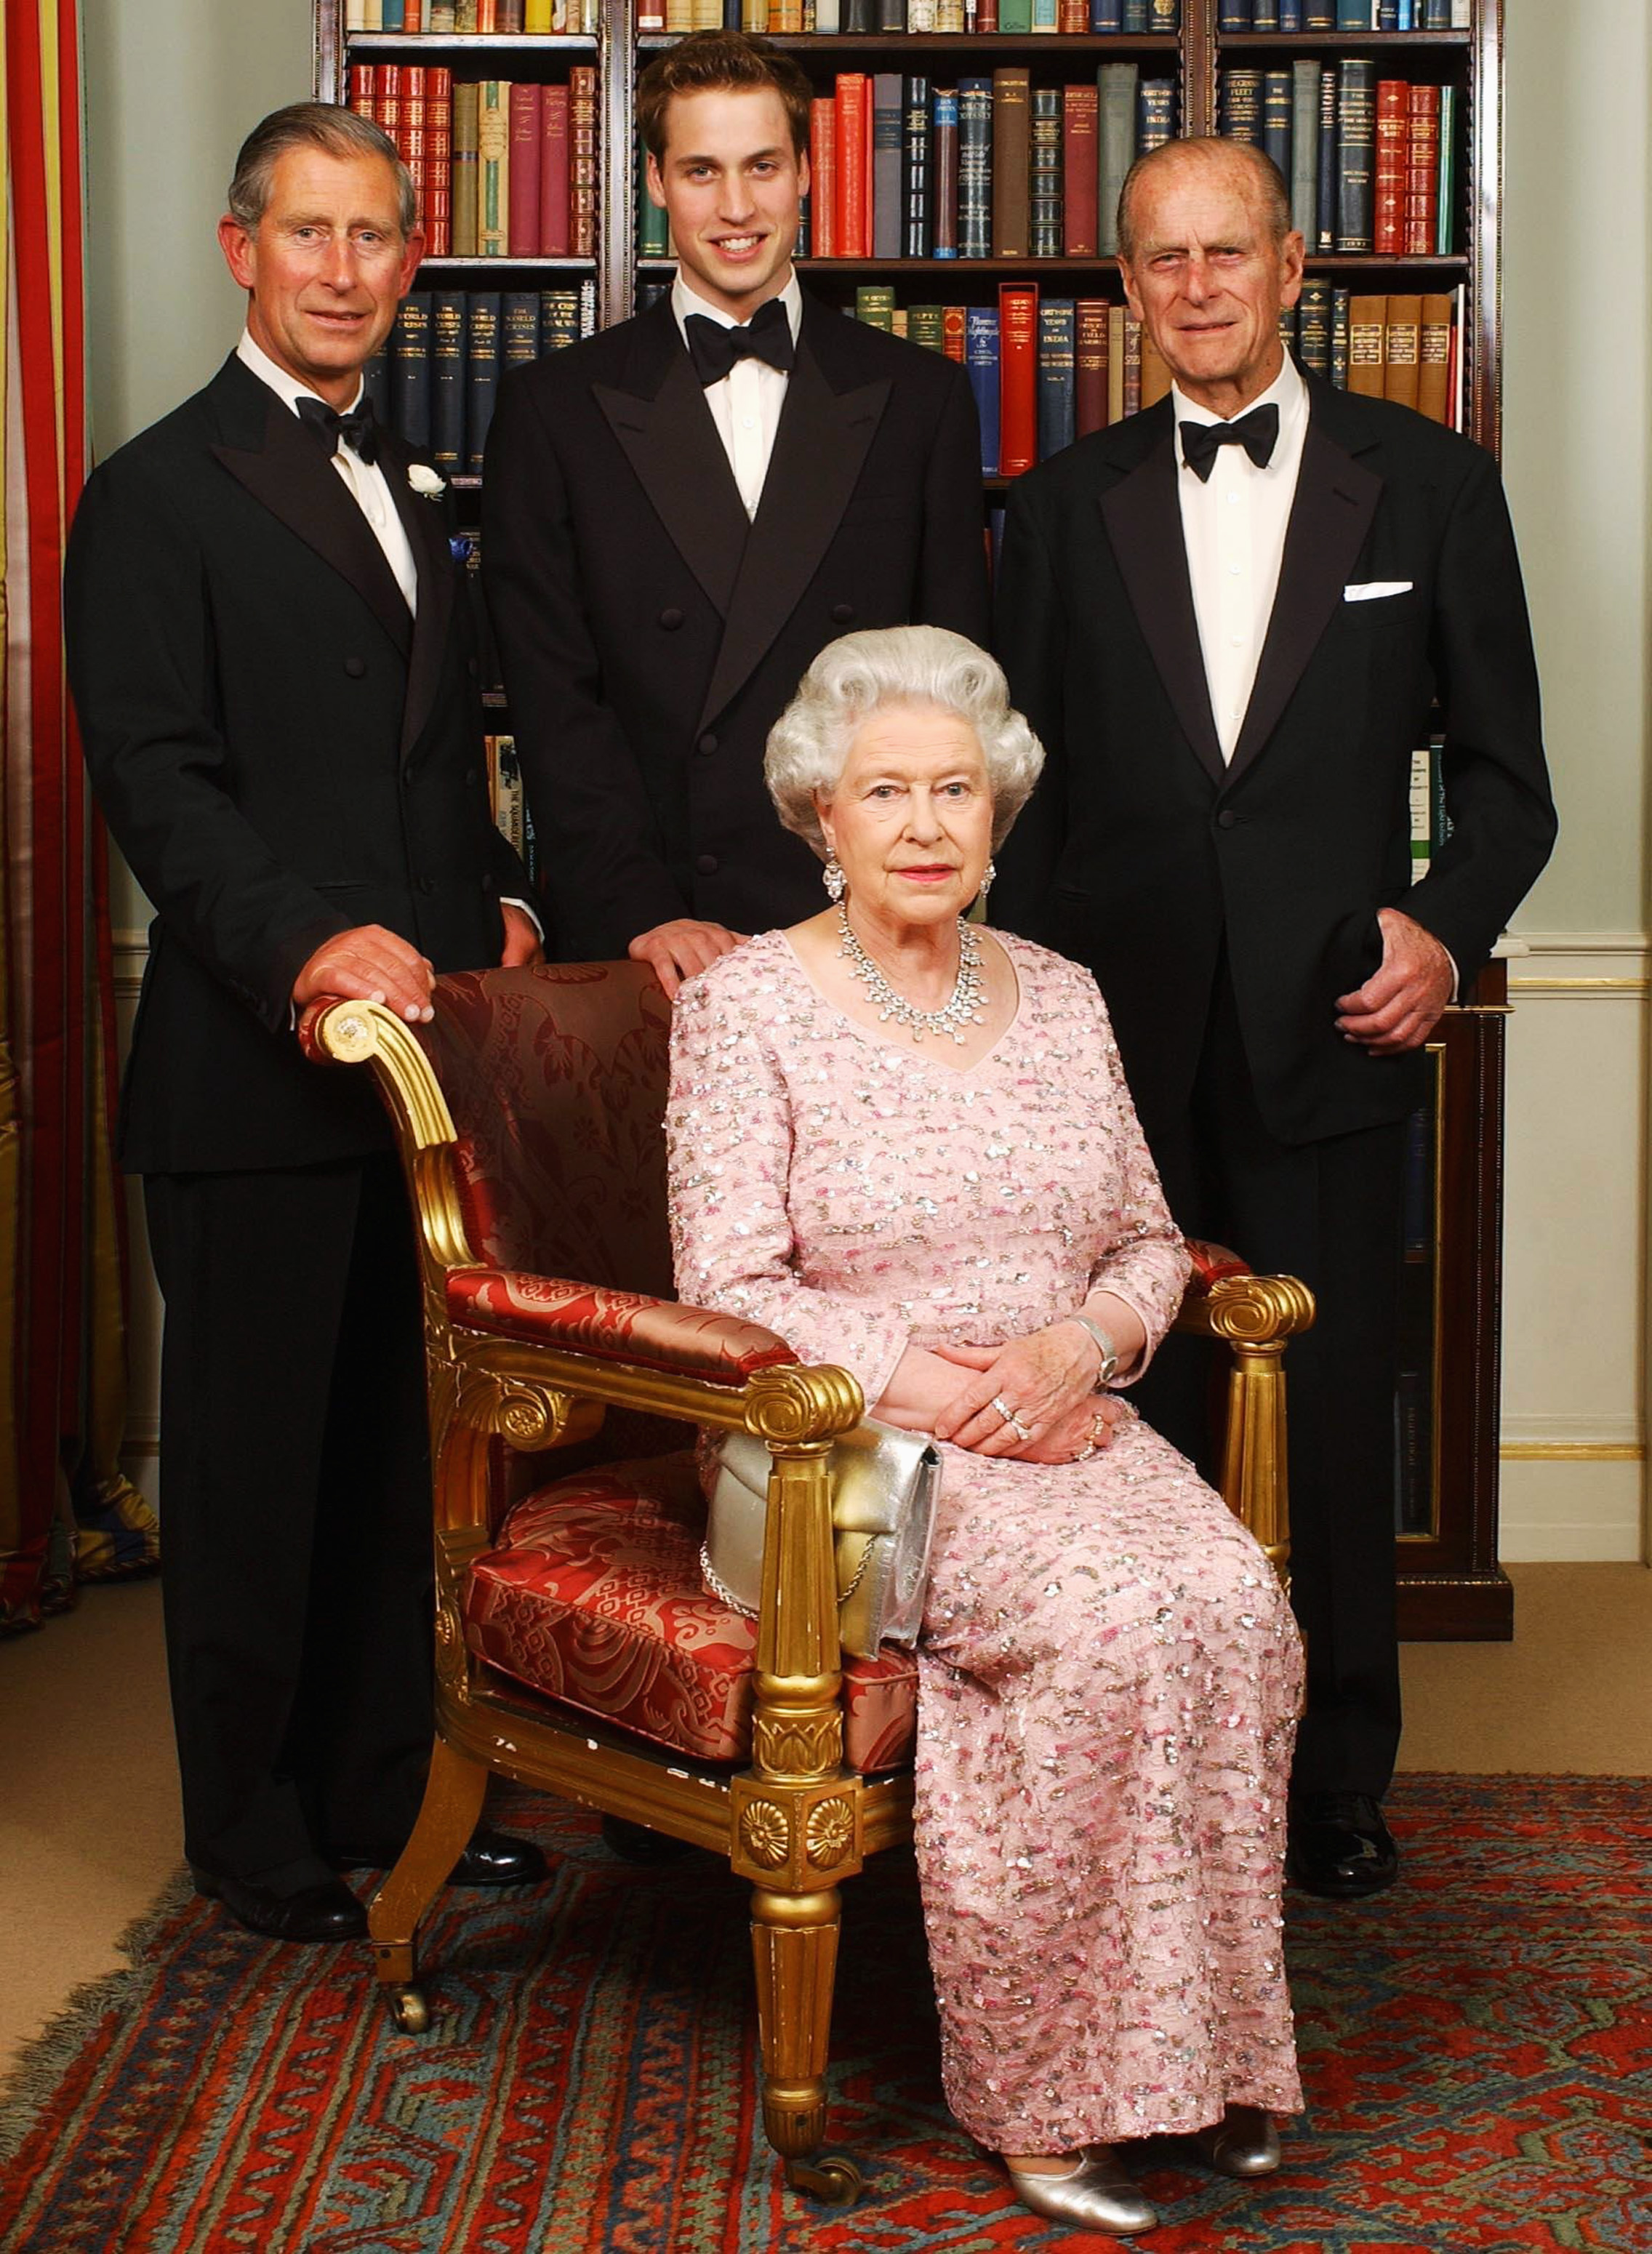 <p>Three generations of the British royal family -- Queen Elizabeth II and husband Prince Philip and her heirs, Prince Charles and <a href="https://www.wonderwall.com/celebrity/profiles/overview/prince-william-482.article">Prince William</a> -- posed for a photograph at Clarence House in London before a dinner to mark the 50th anniversary of the queen's coronation on June 2, 2003.</p>